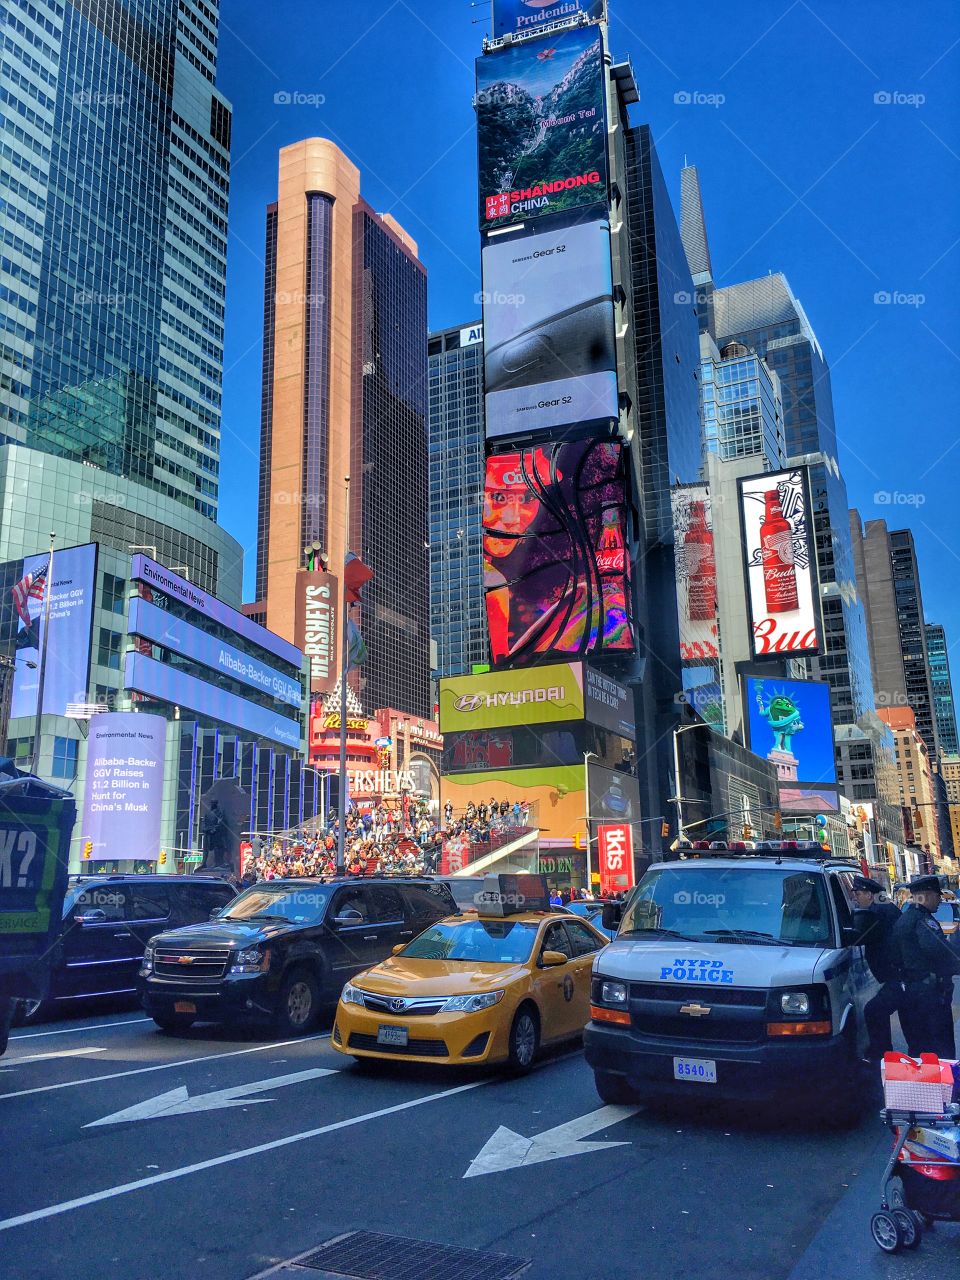 Another view on Times Square 